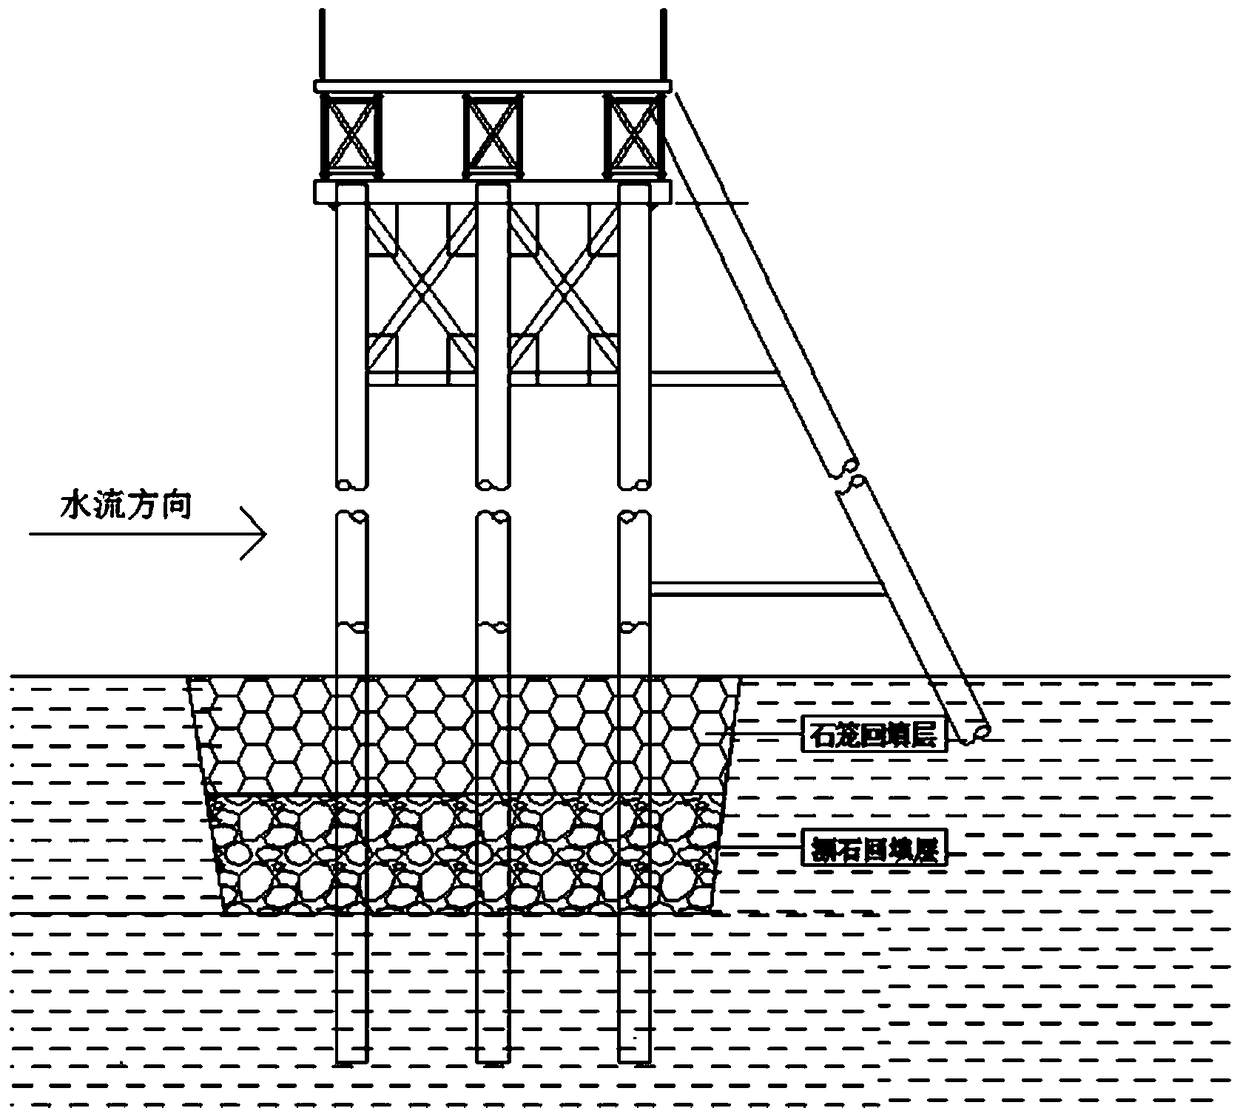 Anti-erosion construction method of steel trestle steel pipe piles on thick boulder covering layer of shallow water riverbed